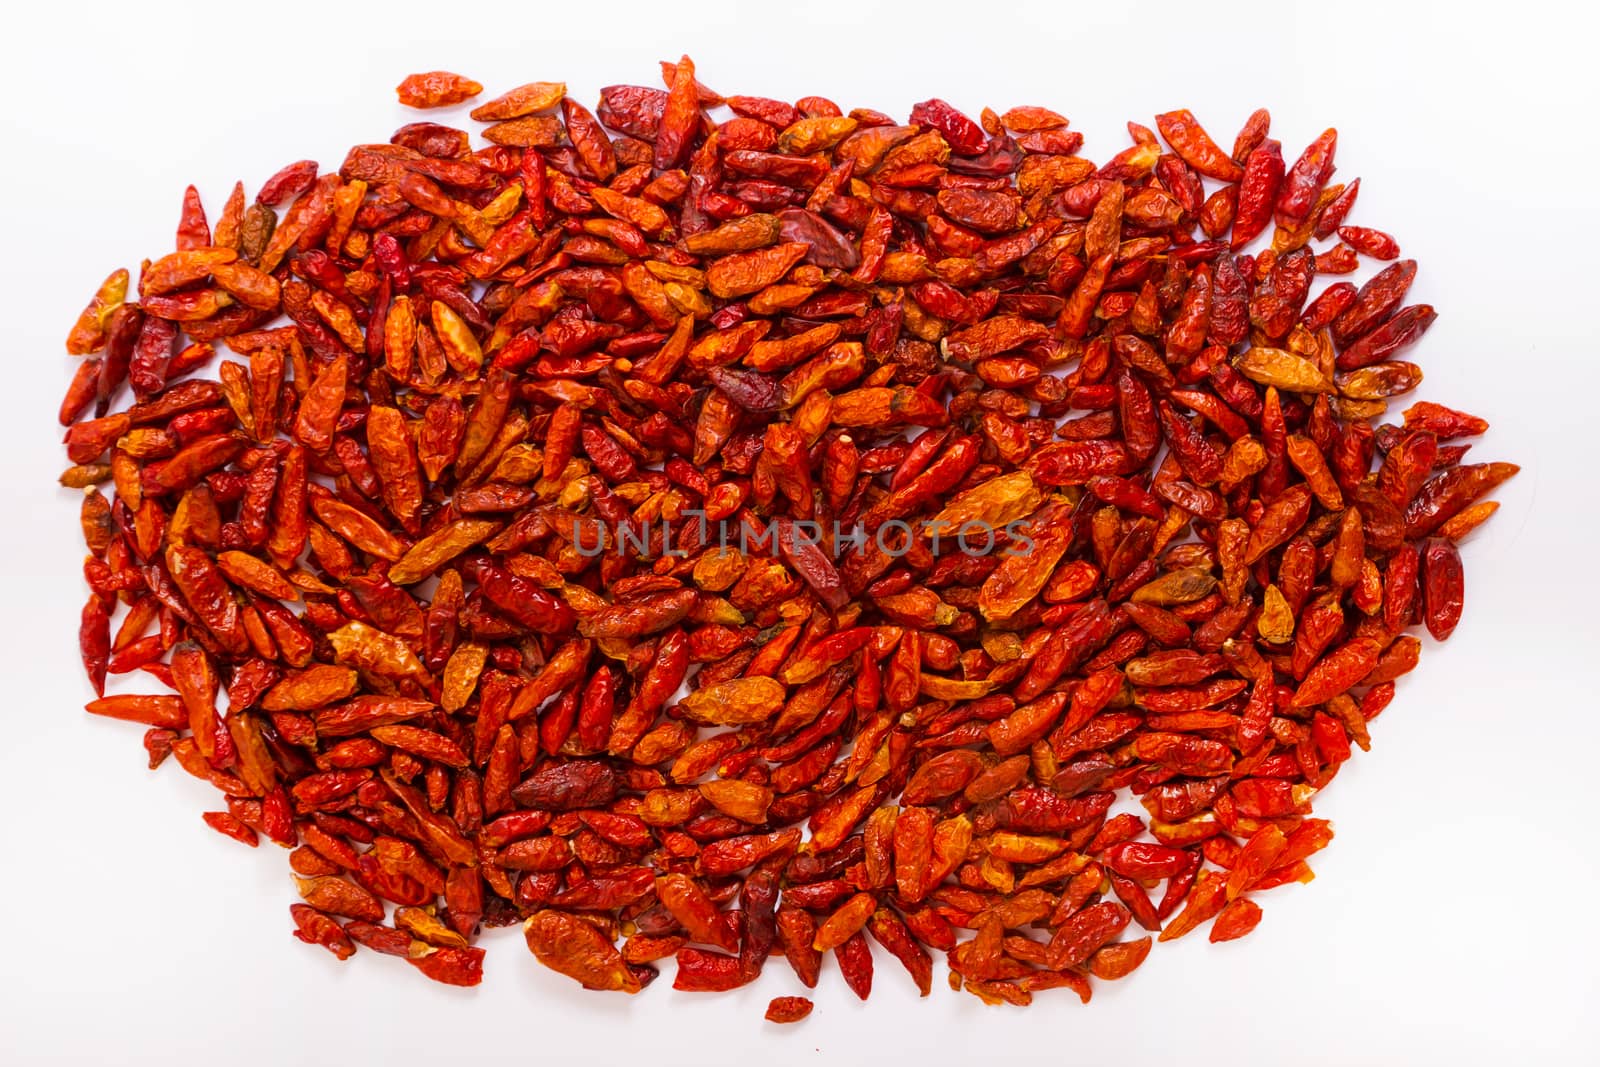 Dried red hot chili Peppers.